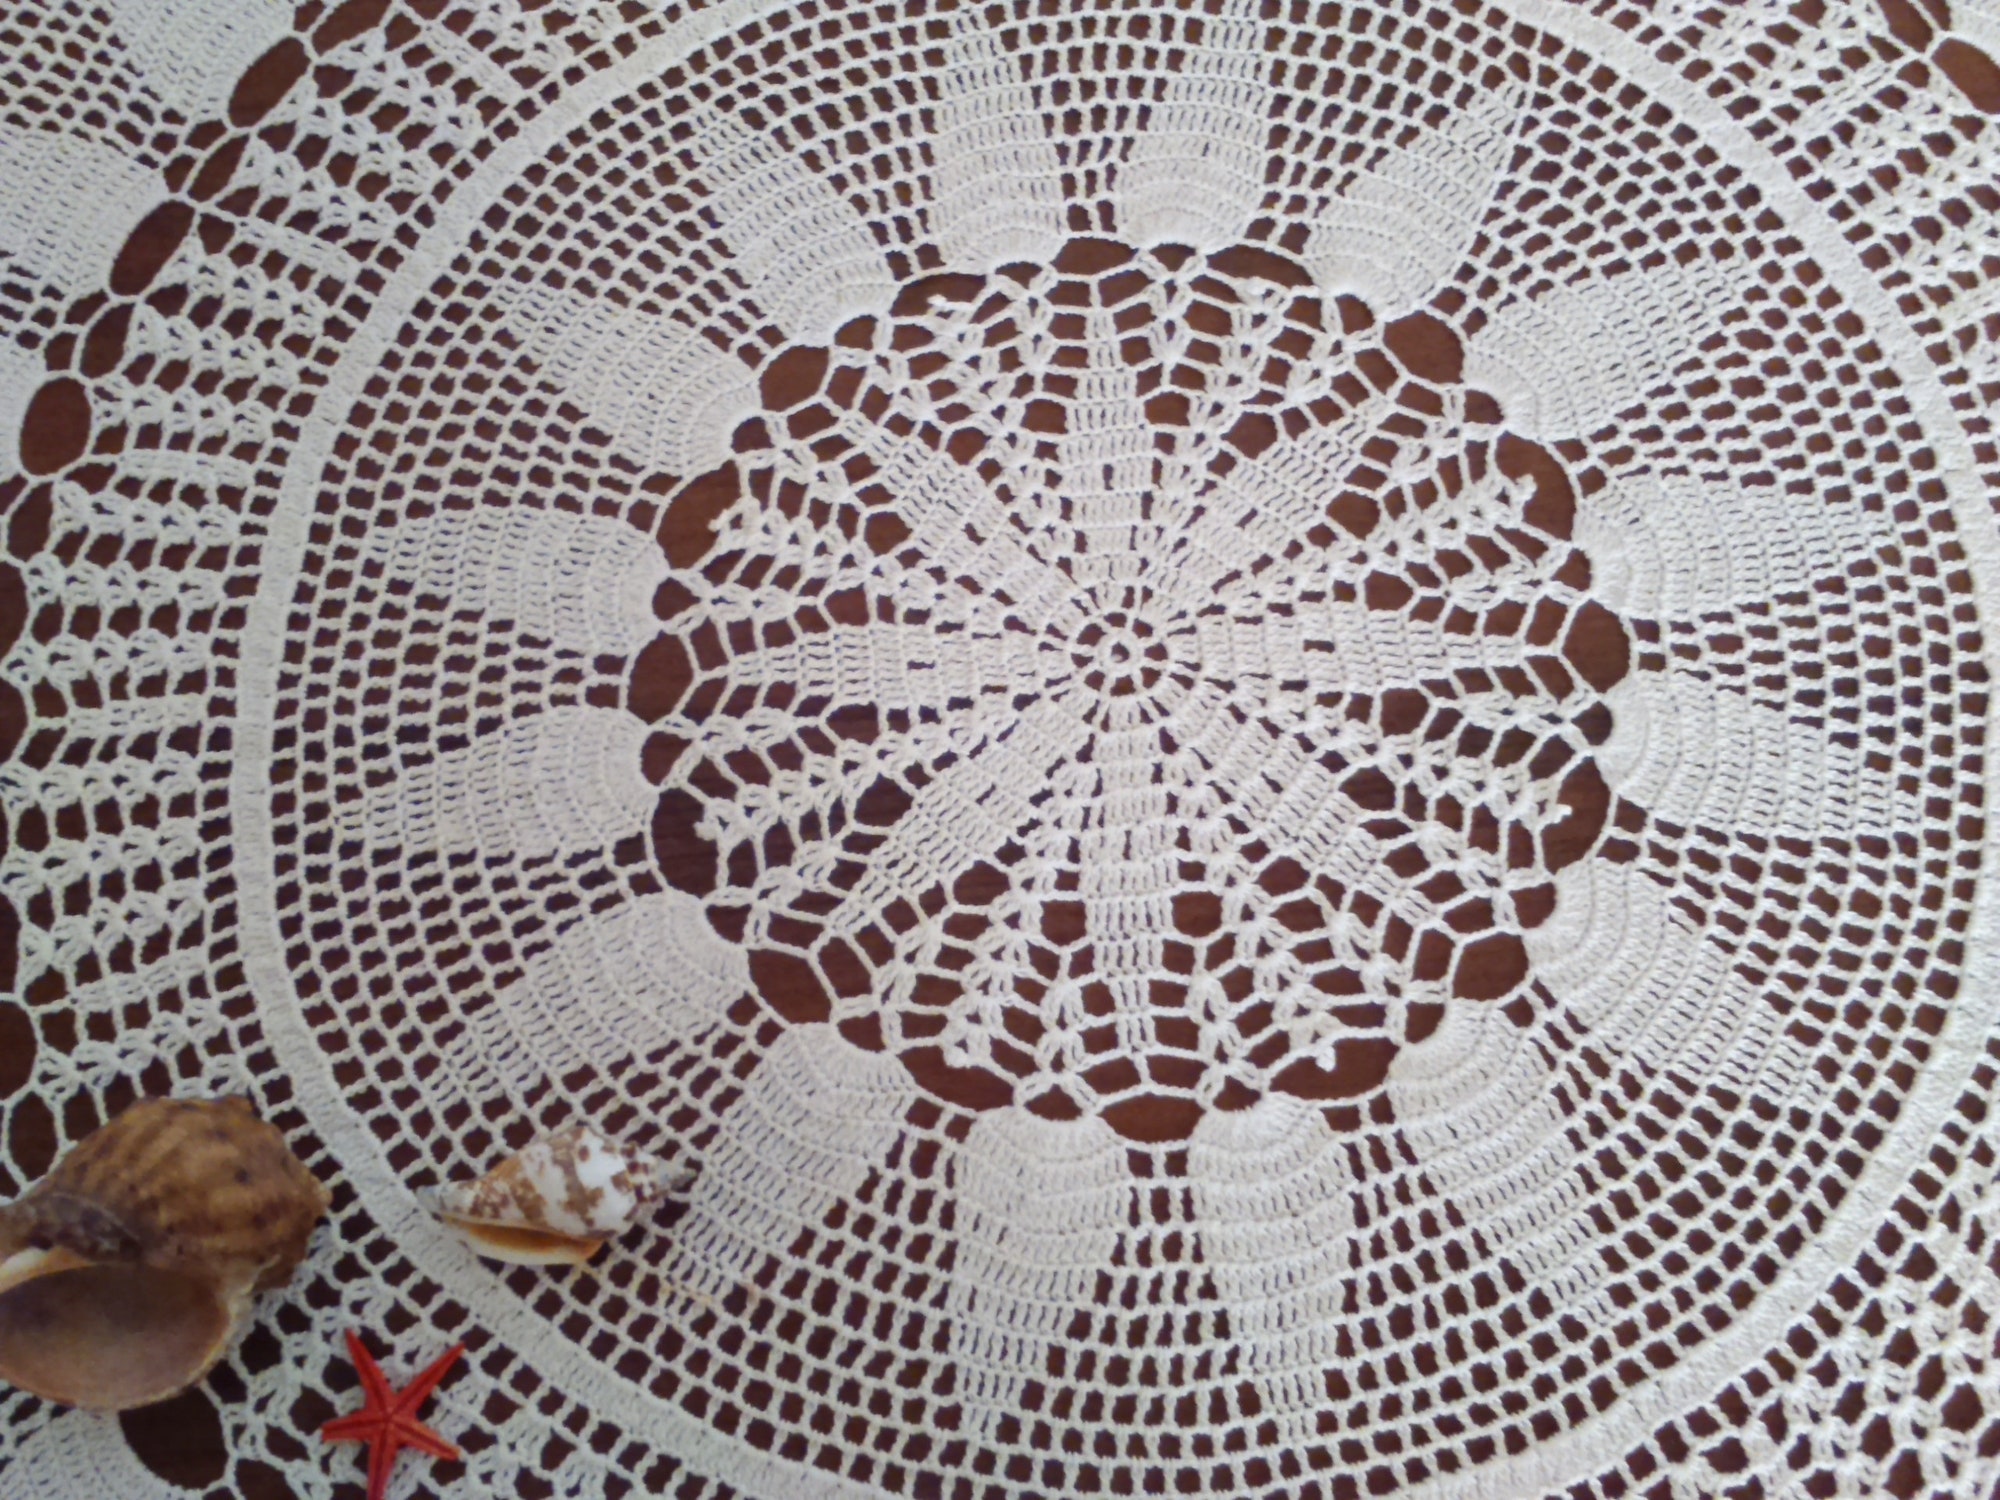 Vintage round tablecloth.